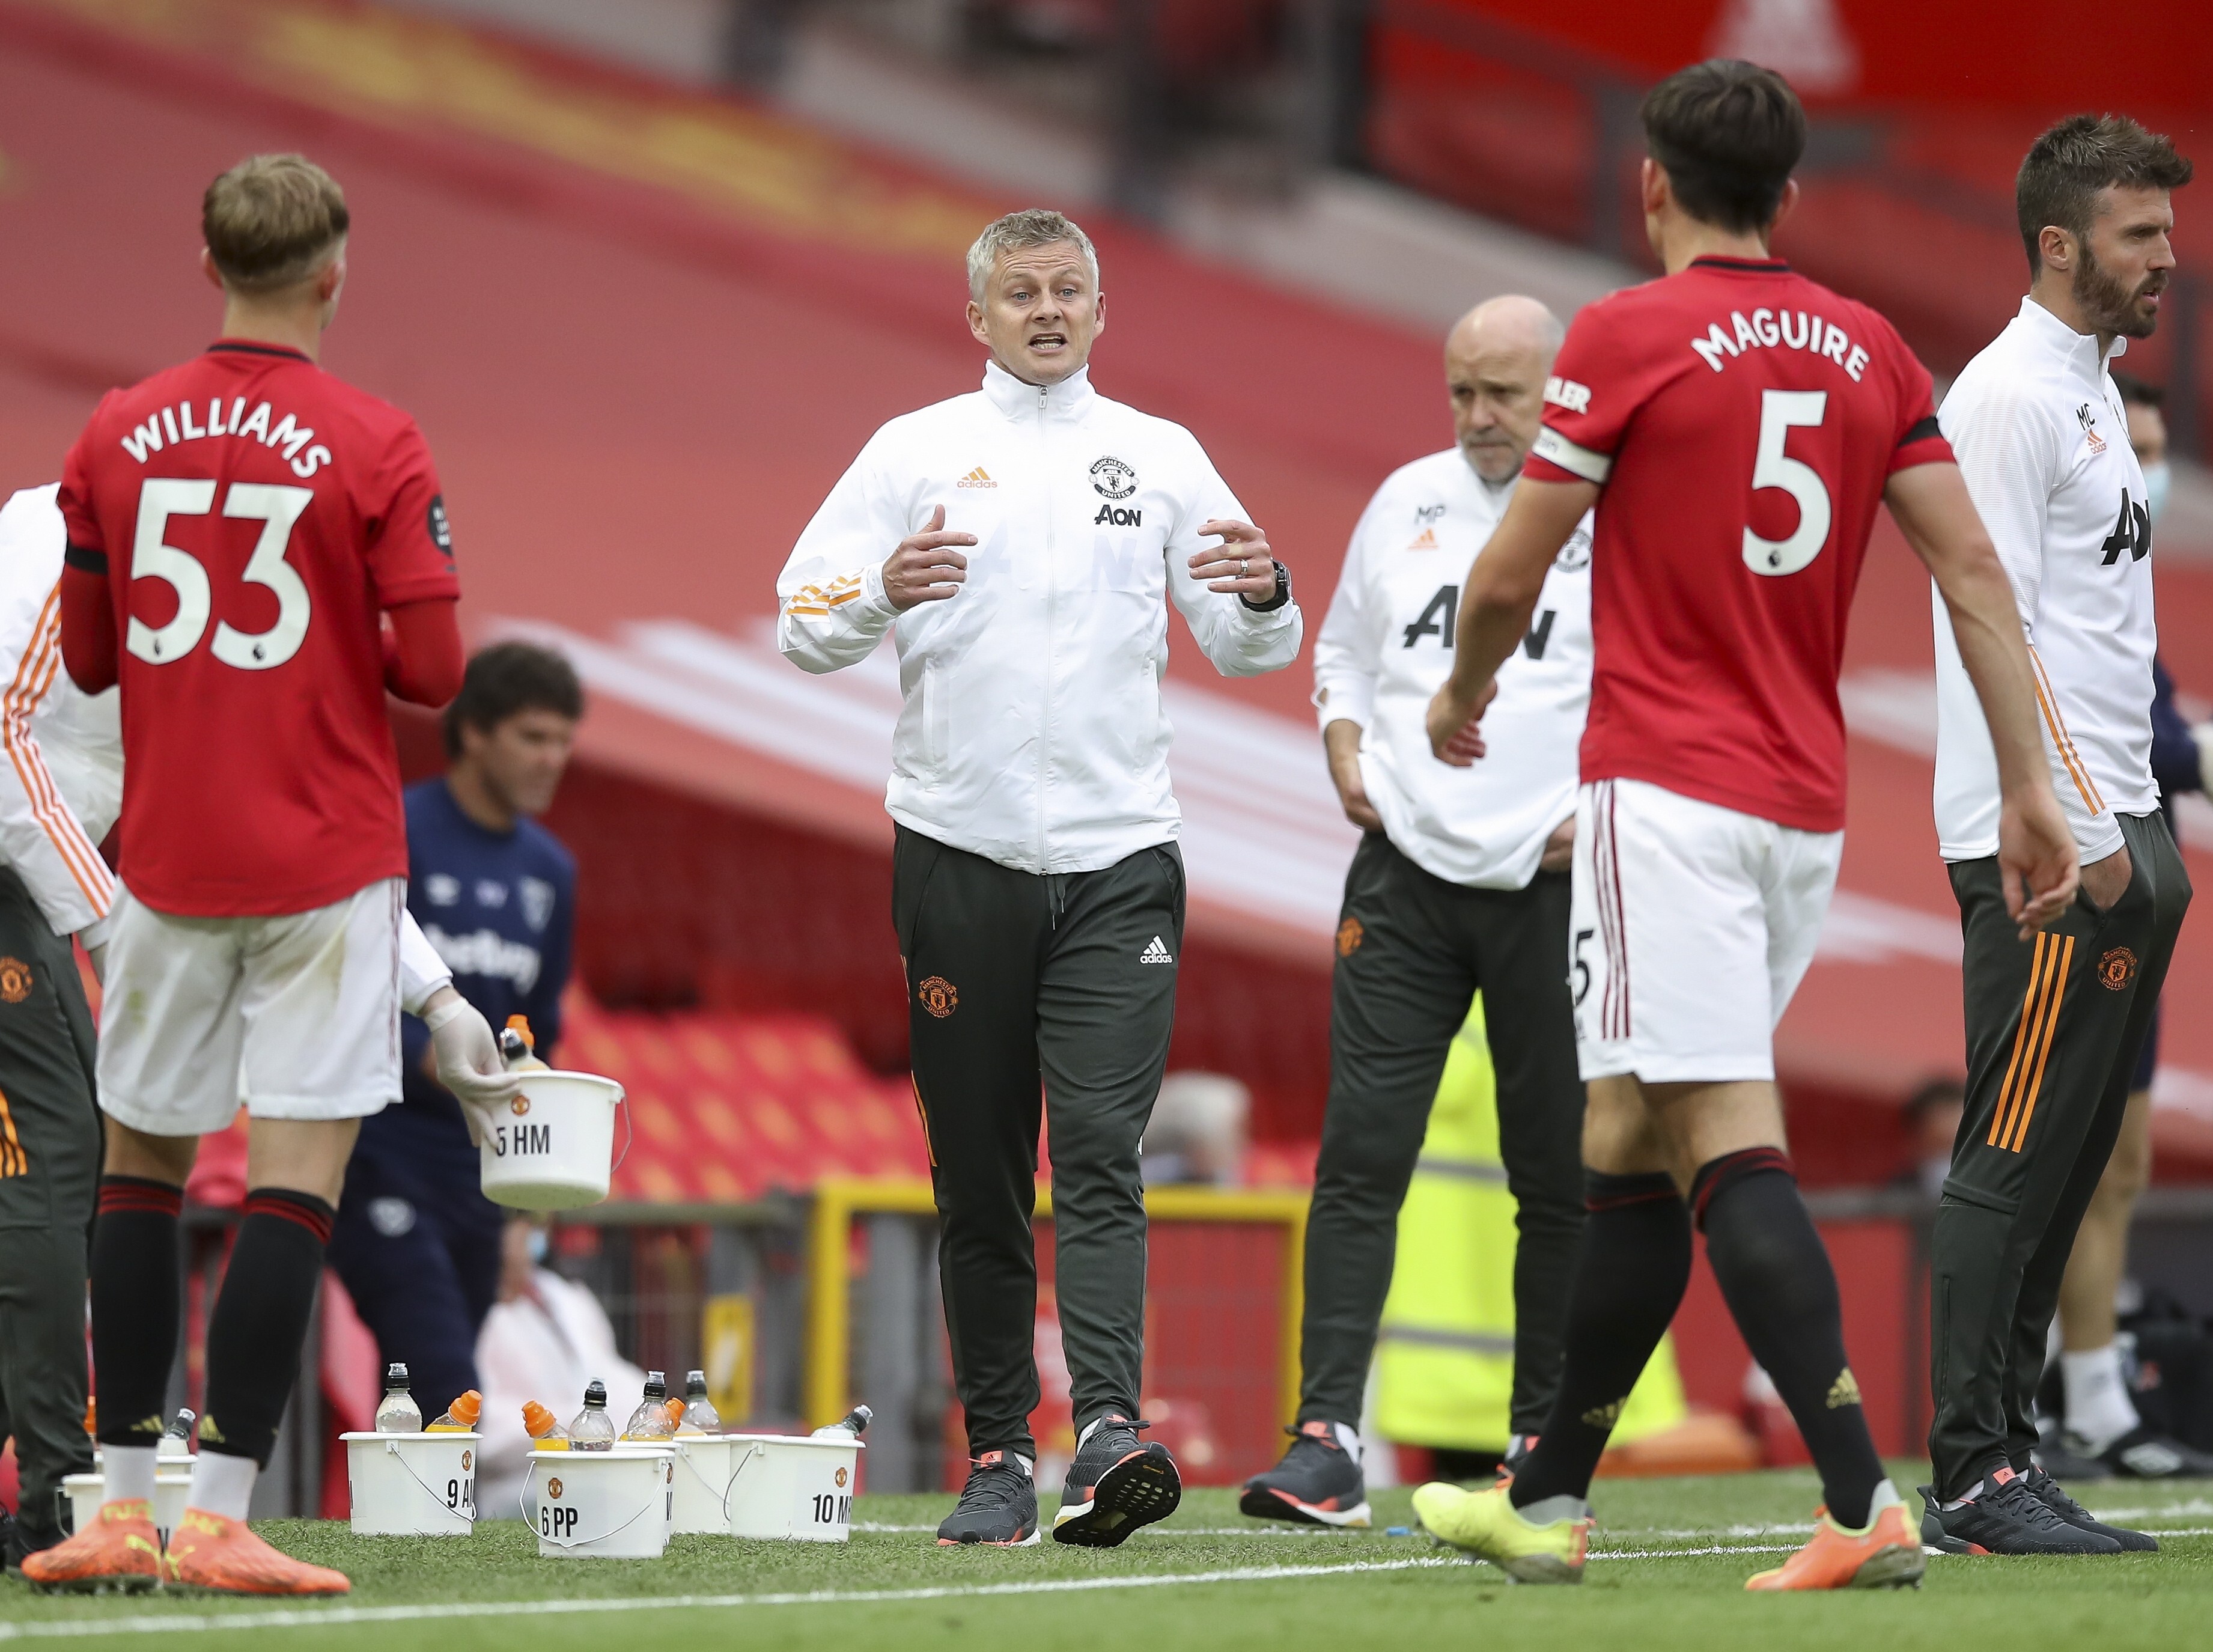 Manchester United head coach Ole Gunnar Solskjaer talks to his players during a Premier League match against West Ham in July. Photo: EPA